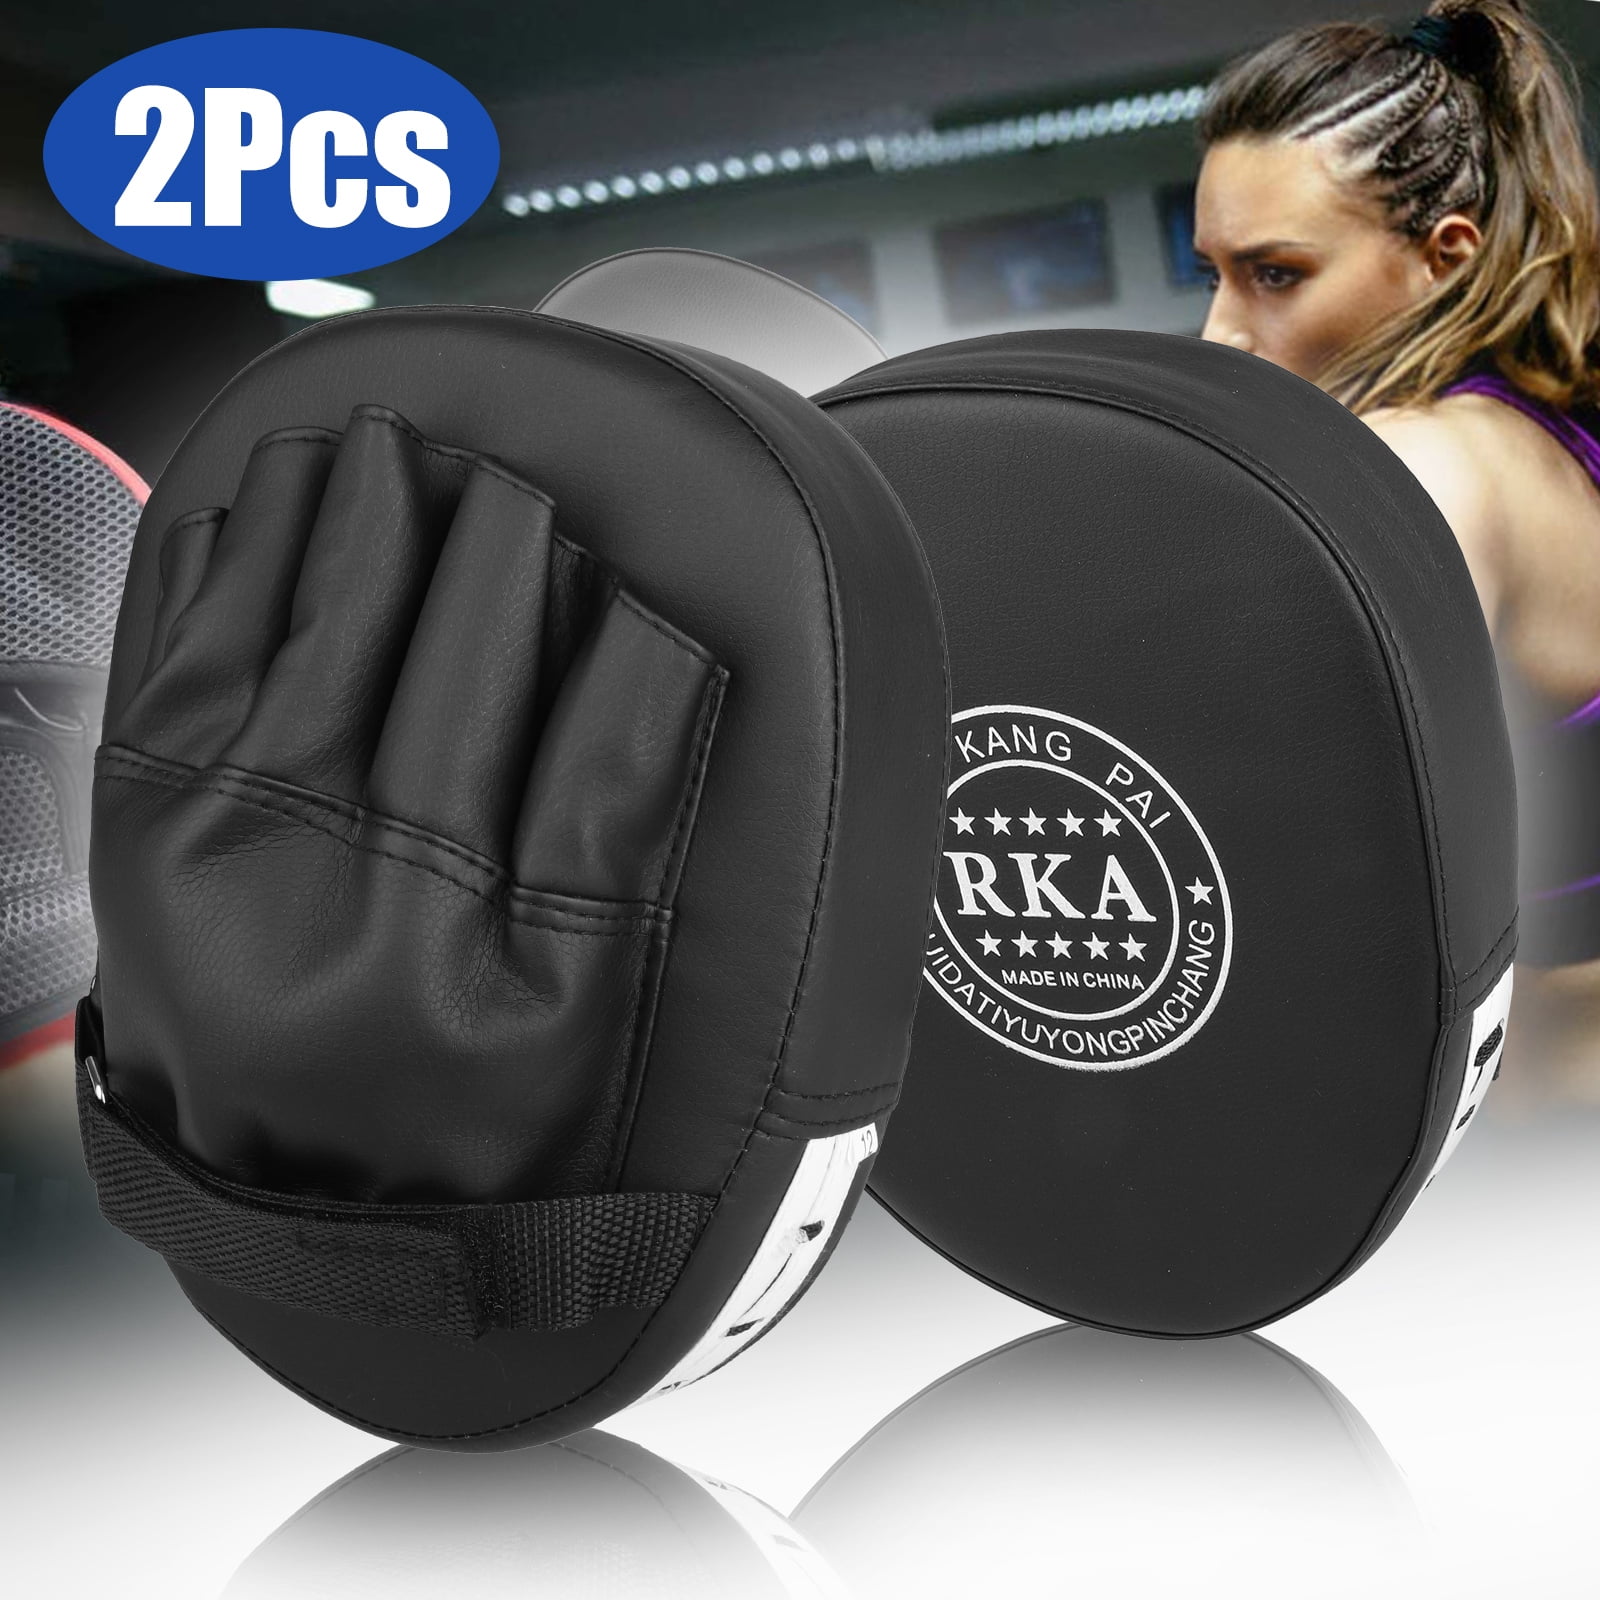 2PCS Focus Boxing Punch Mitts Gloves Training Pad for MMA Karate Muay Thai Kick 